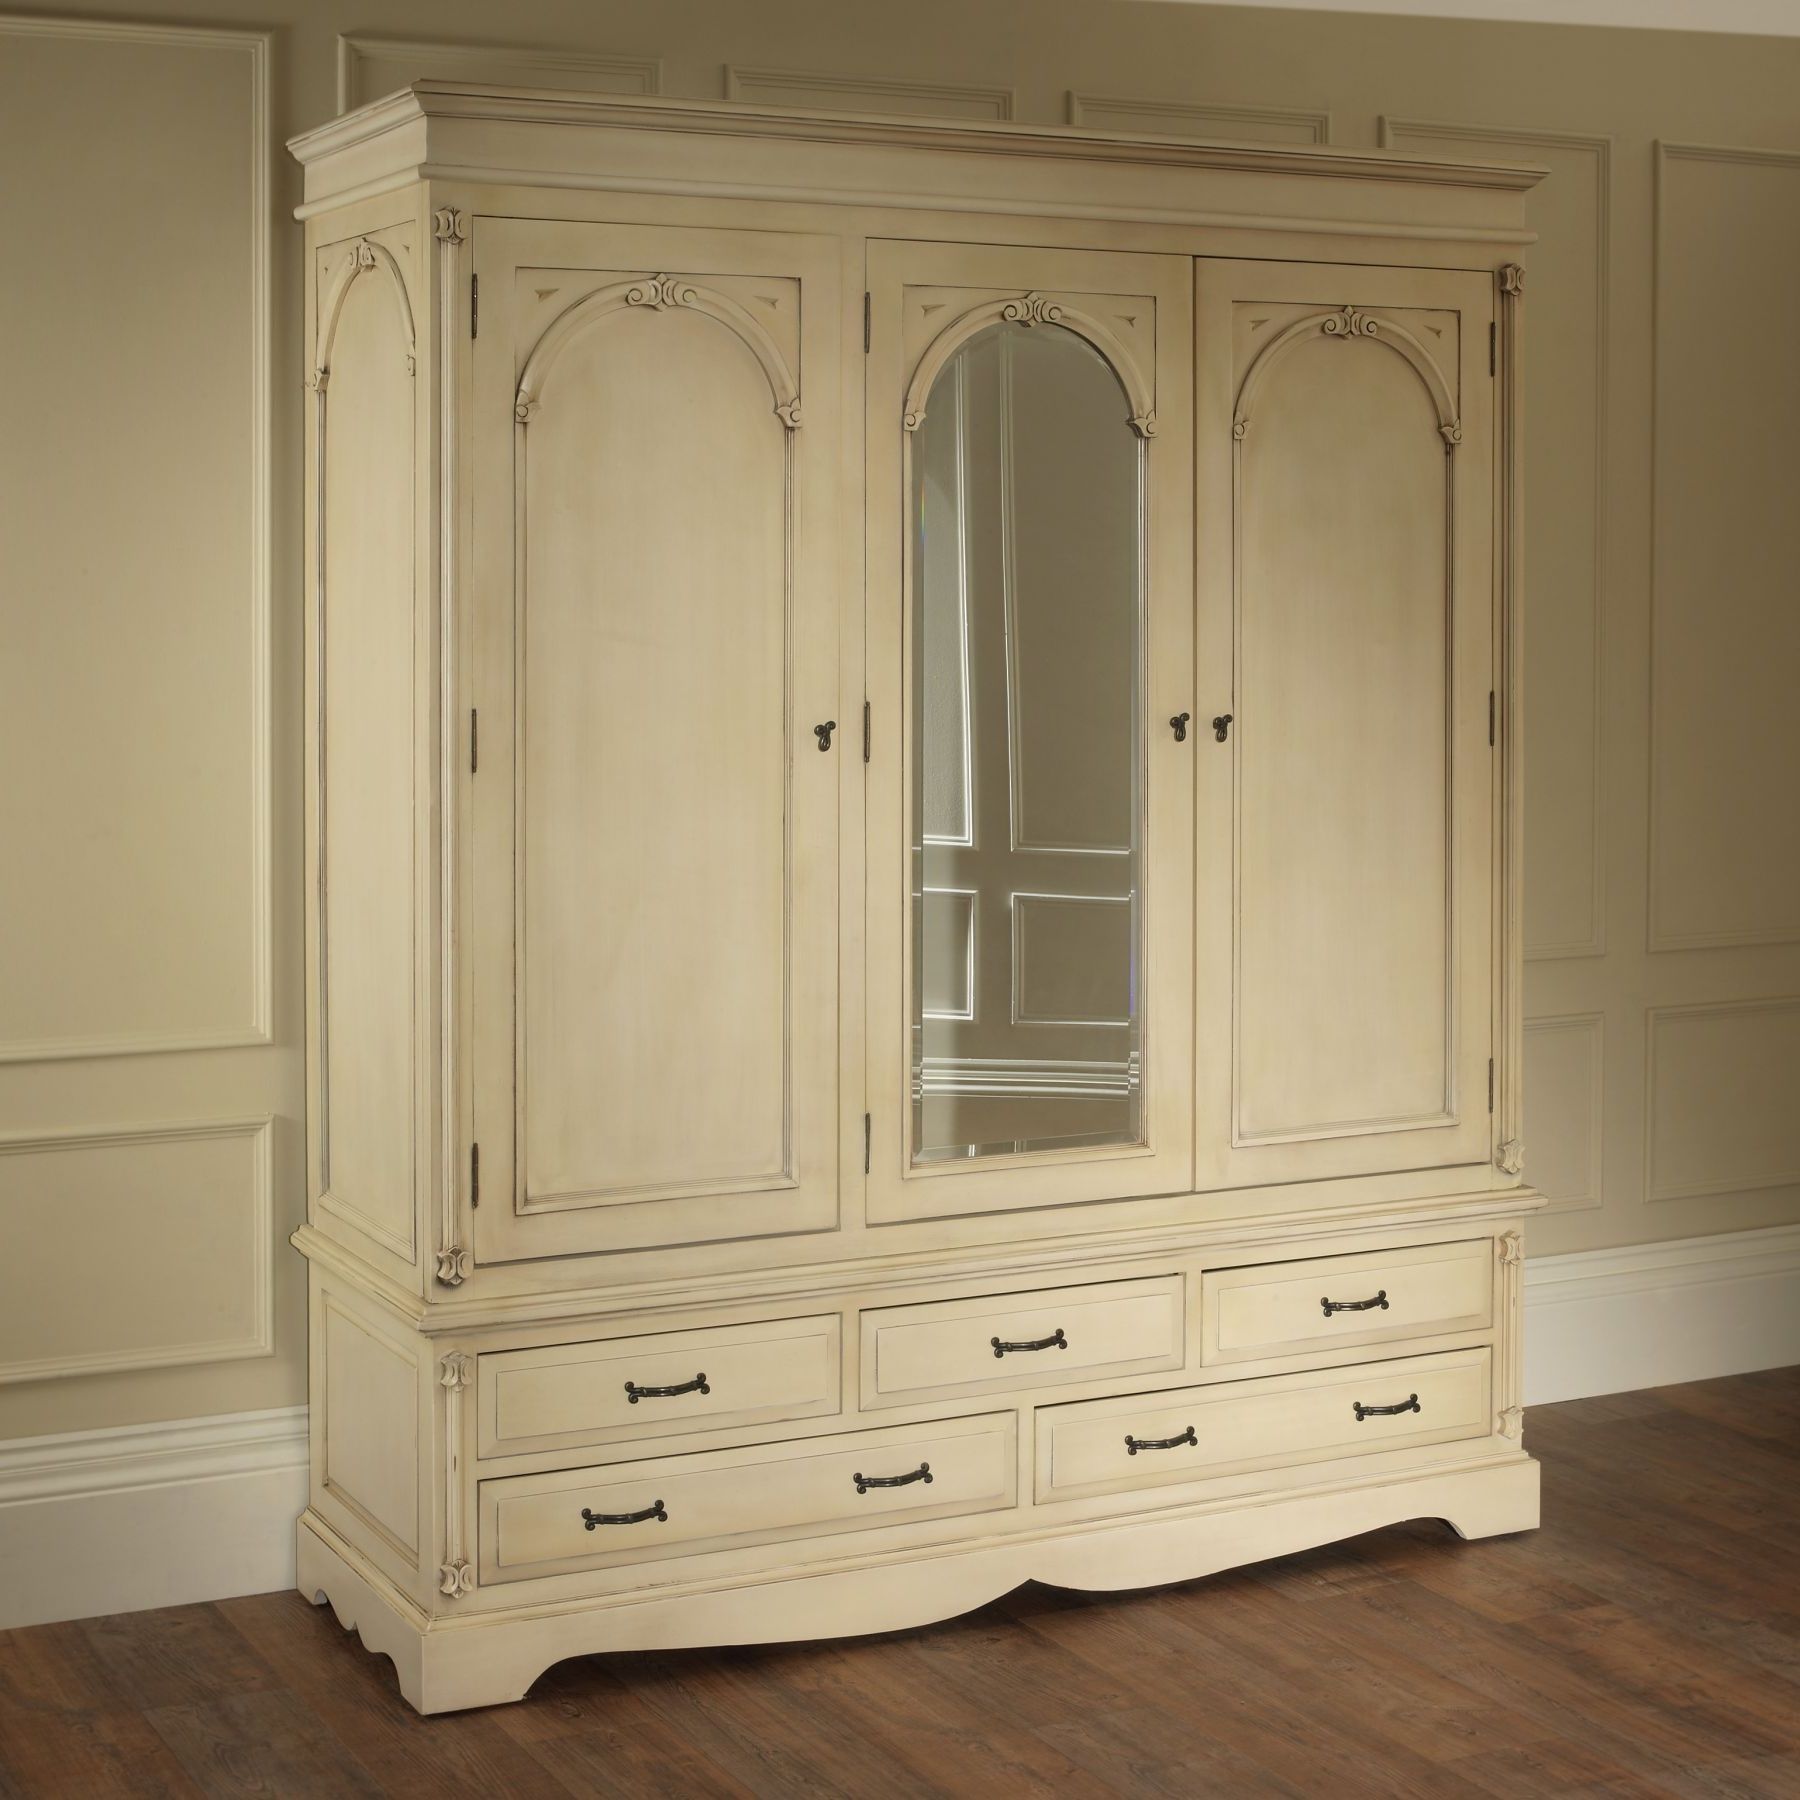 Victorian Antique French Wardrobe Works Wonderful Alongside Our Throughout Preferred Antique Style Wardrobes (View 6 of 15)